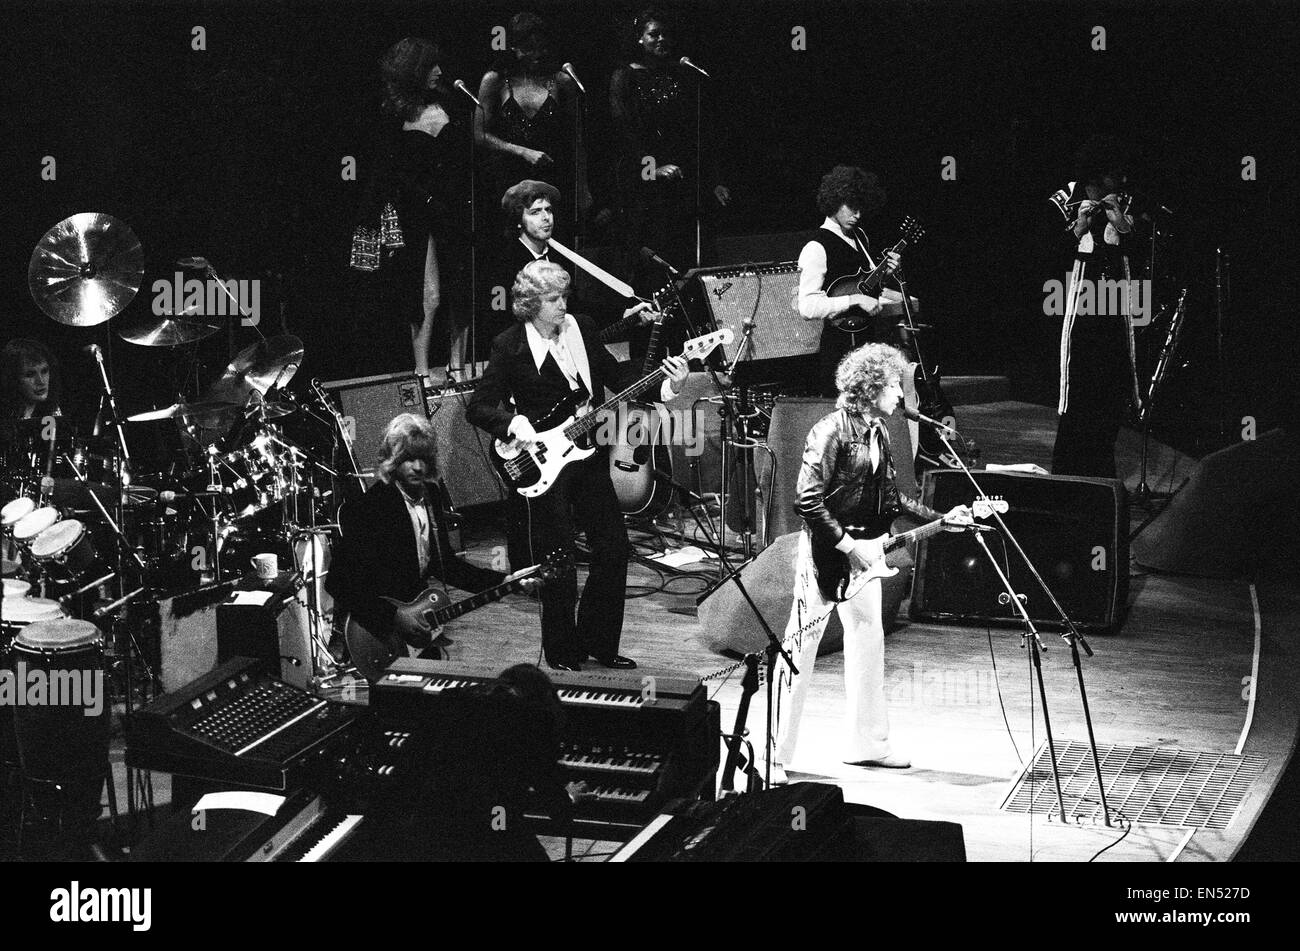 Bob Dylan in concert on stage at Earls Court in London, 15th June 1978. Stock Photo